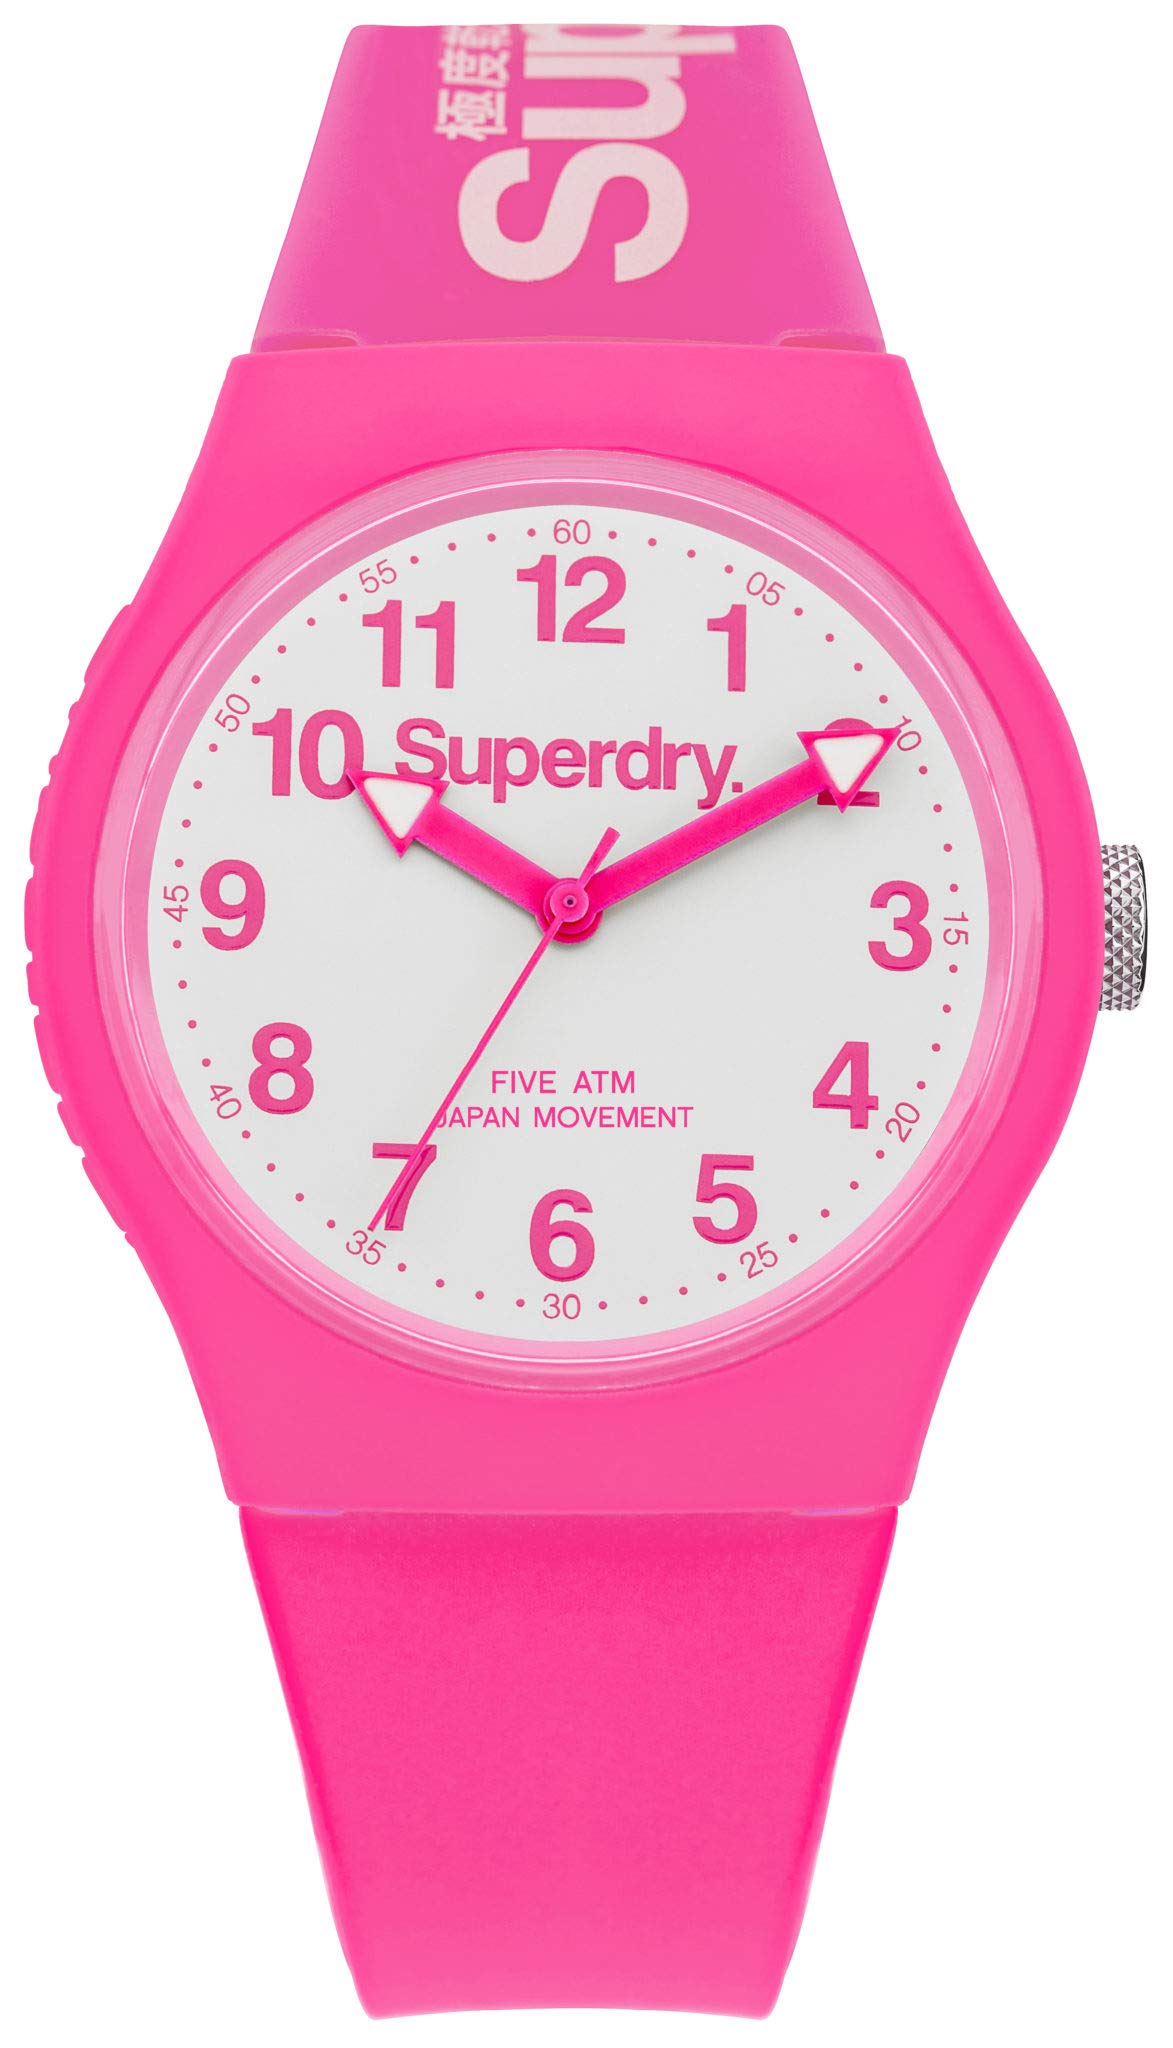 Superdry SYG164PW Unisex watch – Pink and White